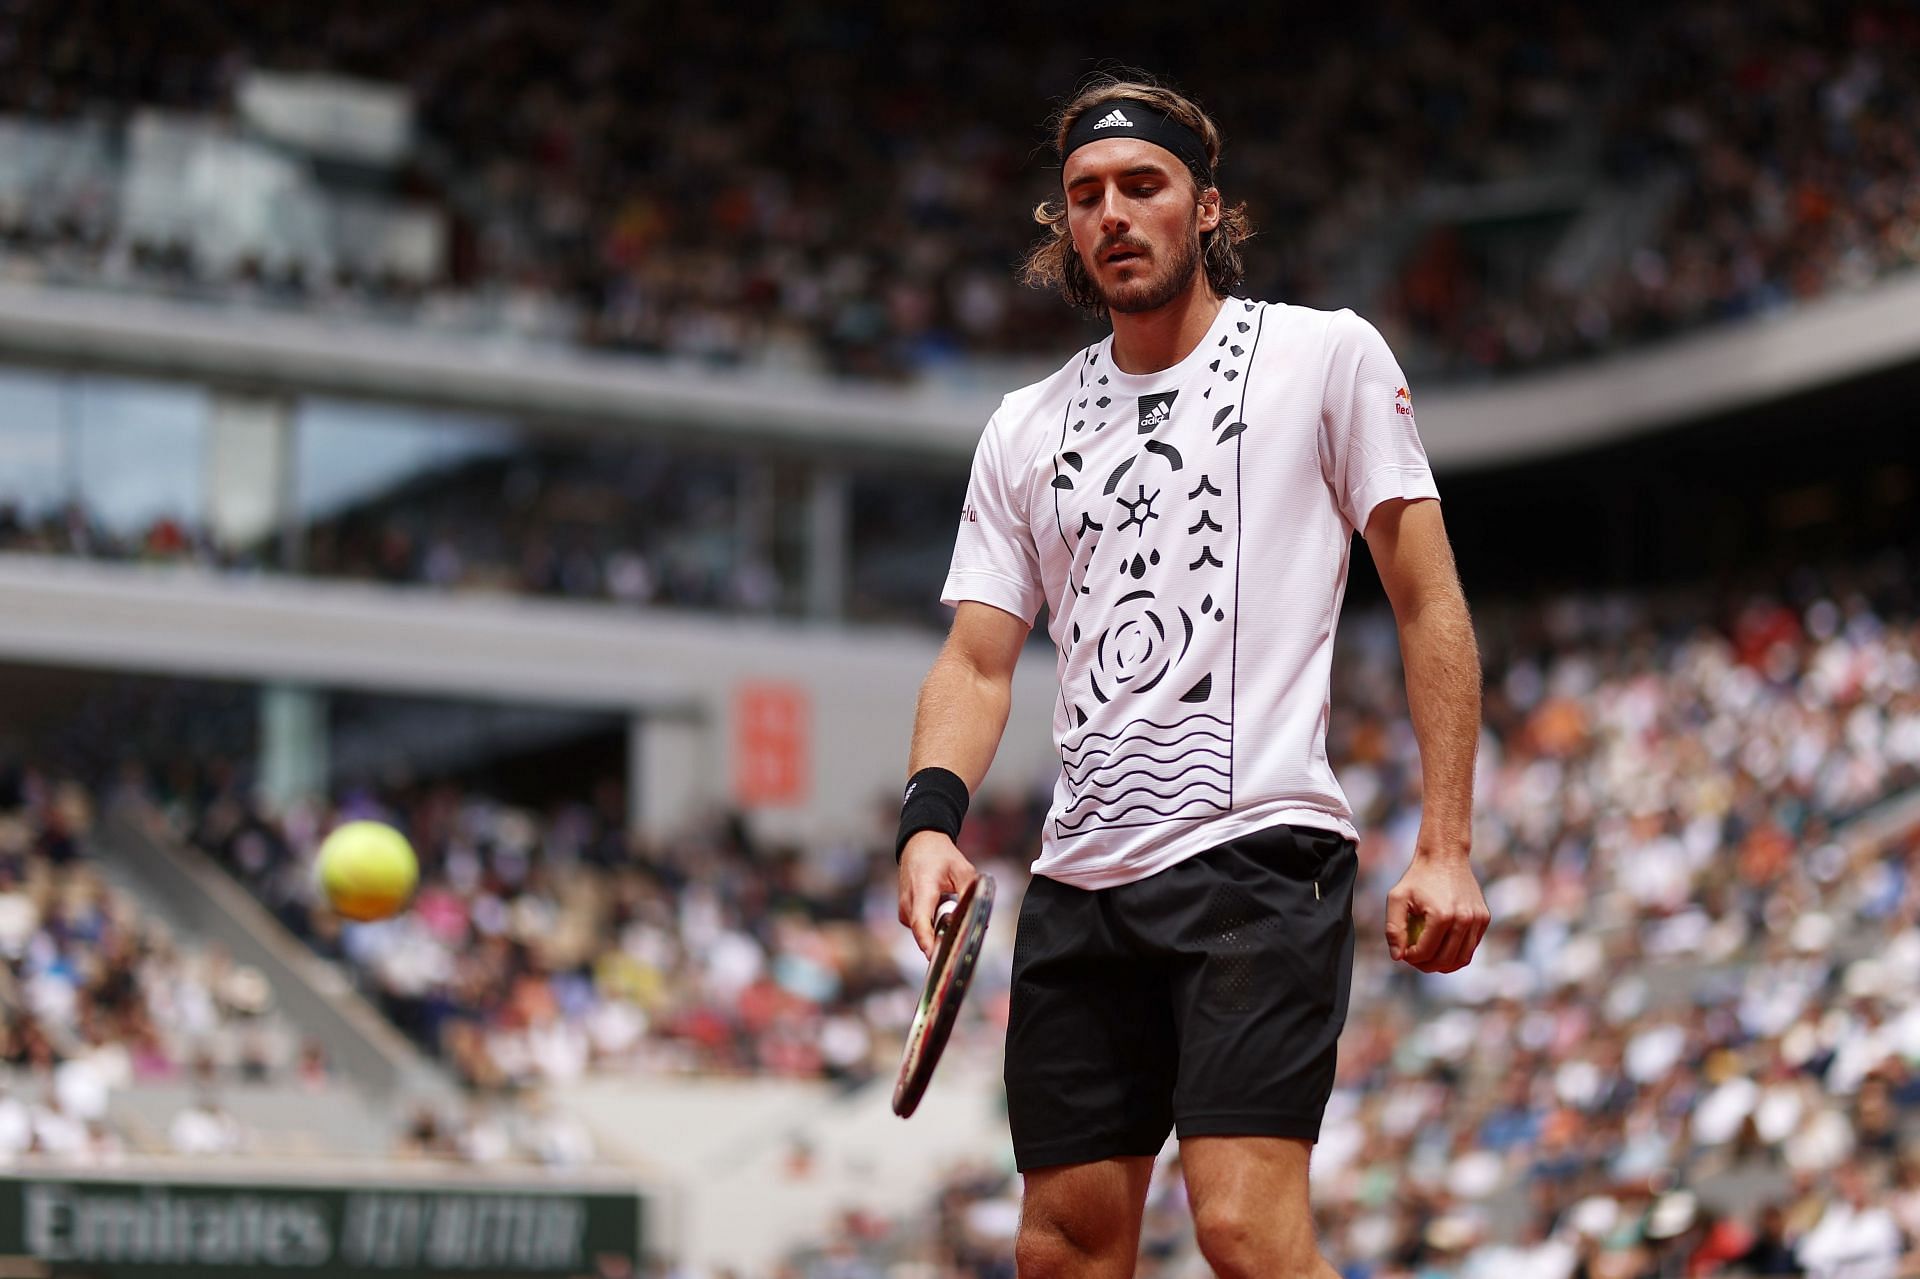 Stefanos Tsitsipas at the 2022 French Open